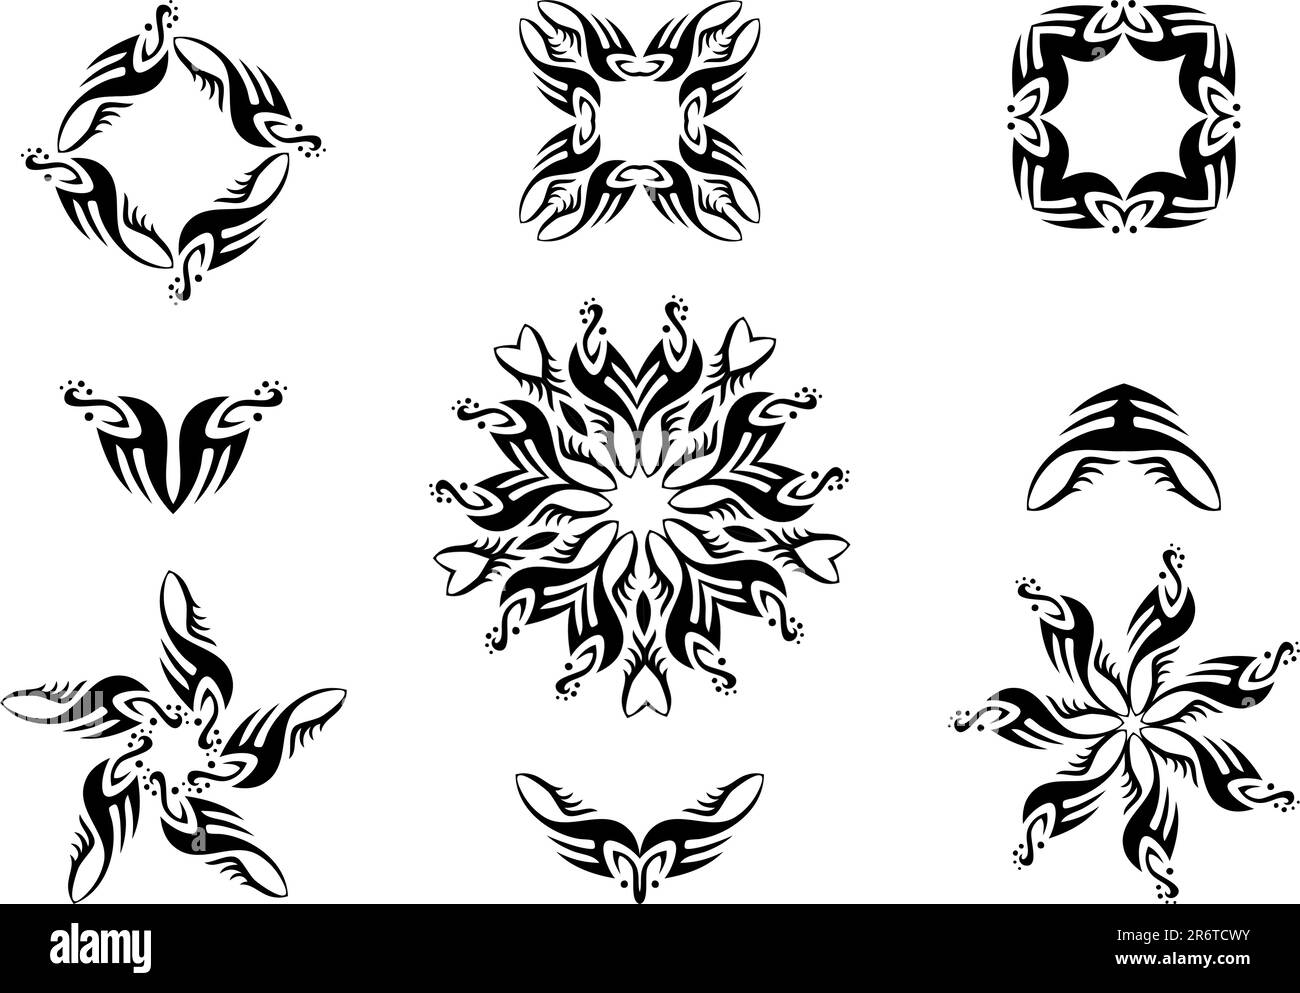 a collection of vector design elements in tribal tattoo style 2R6TCWY